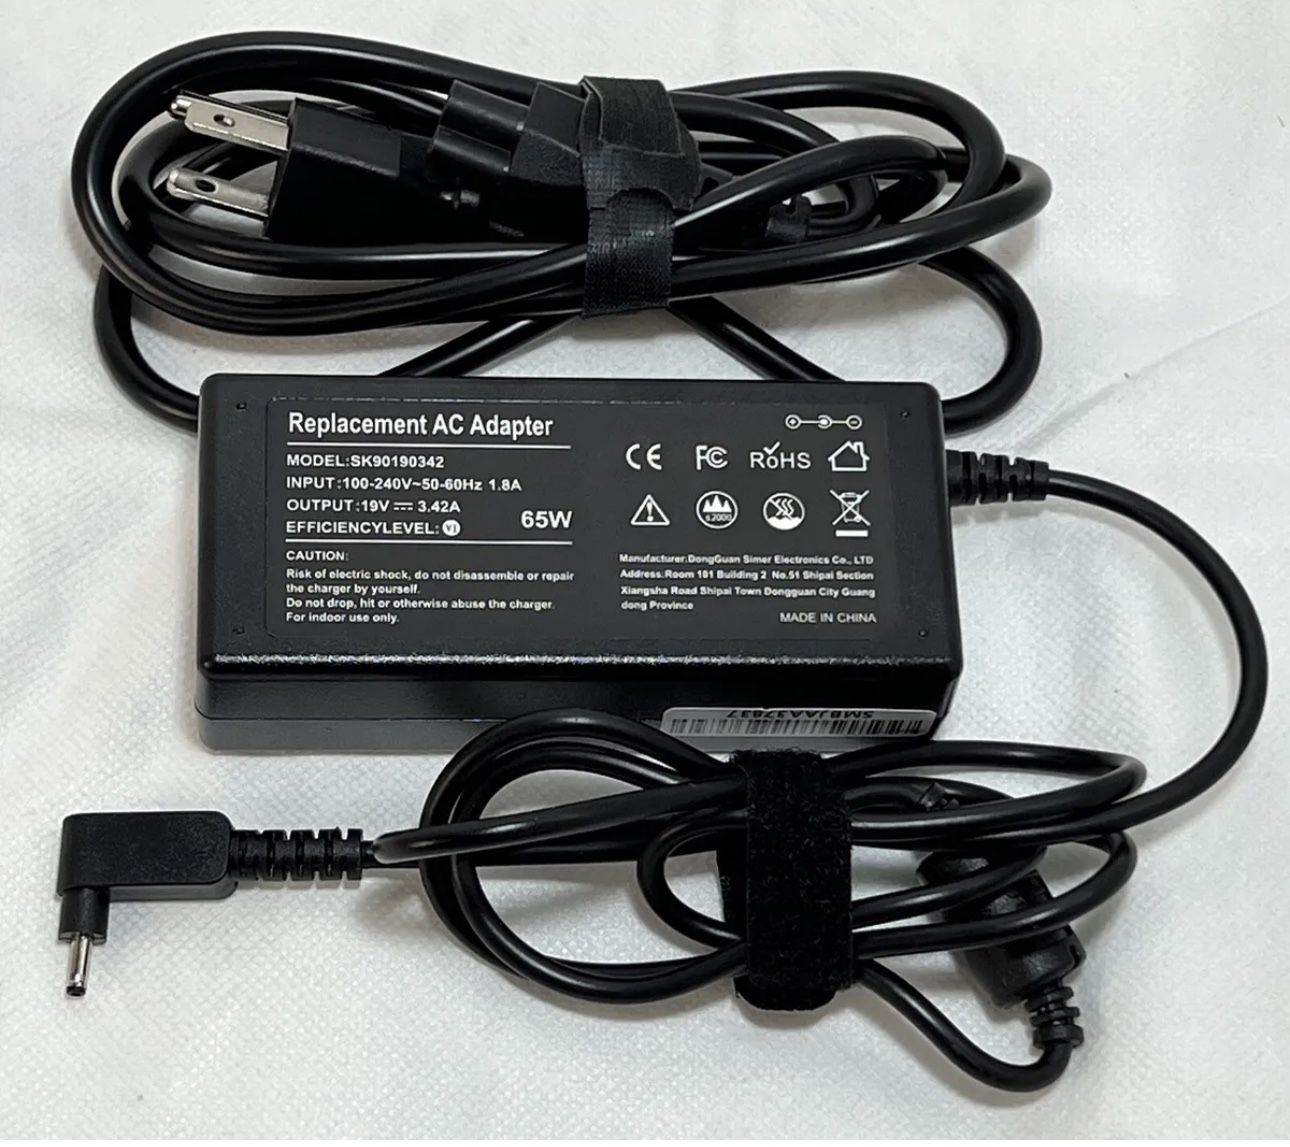 Replacement AC Power Adapter Model SK(contact info removed)2 for Acer Laptop Computers